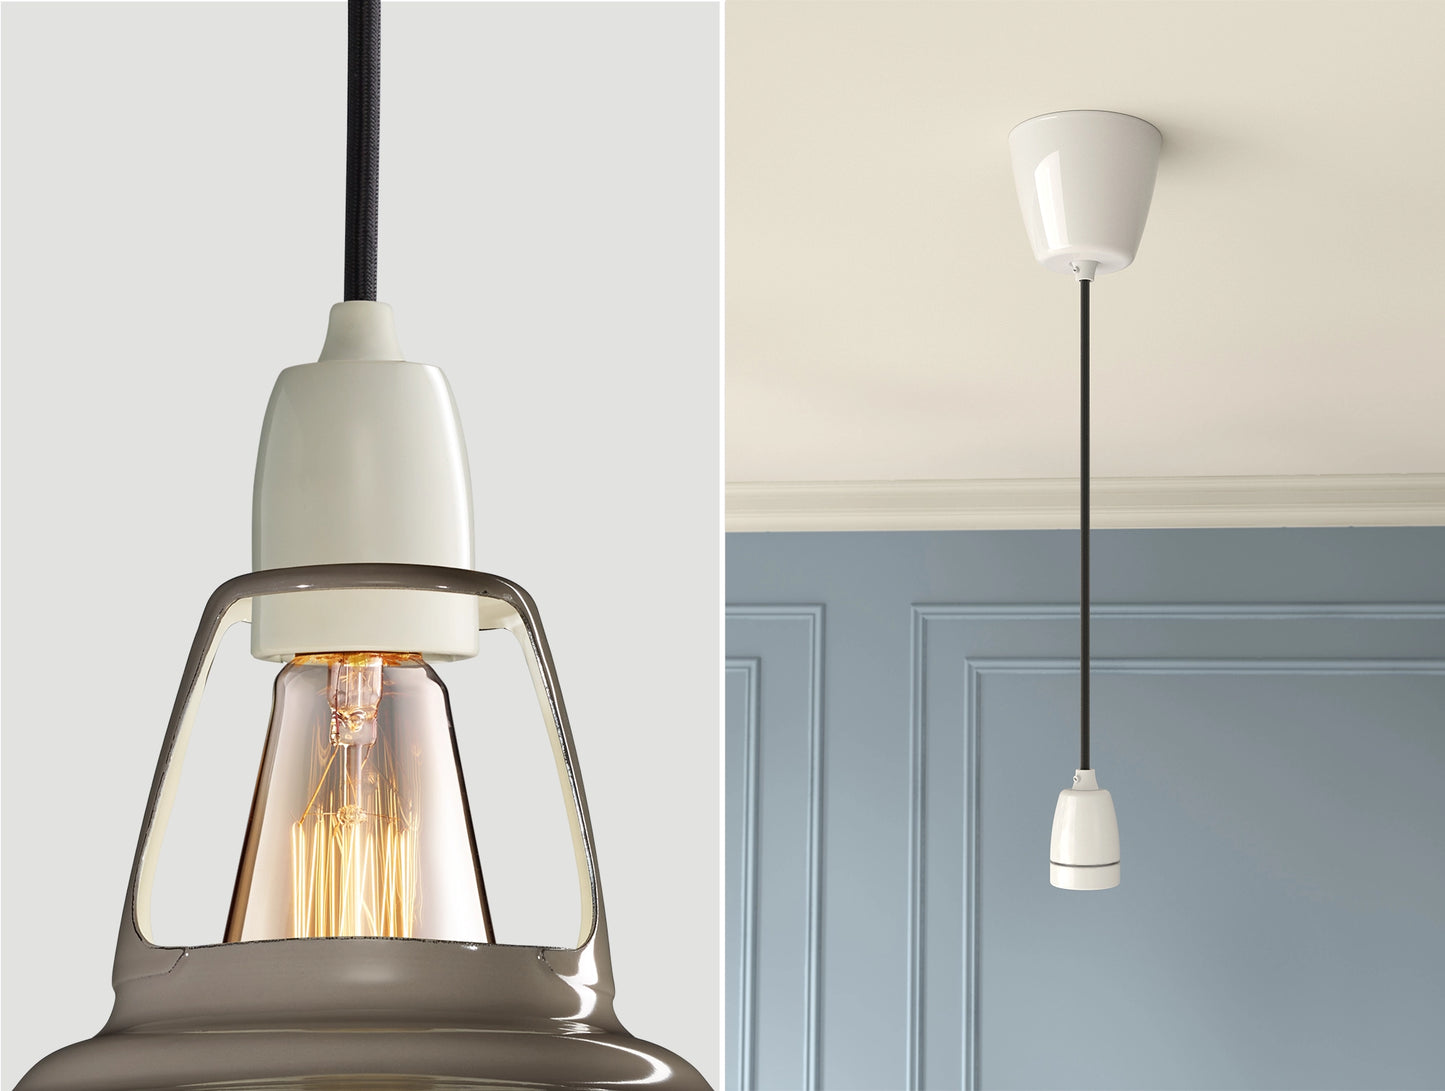 Close up of an E27 Porcelain suspension set on an Original Grey lampshade on the left. On the right, an E27 Porcelain pendant set is hanging from the ceiling